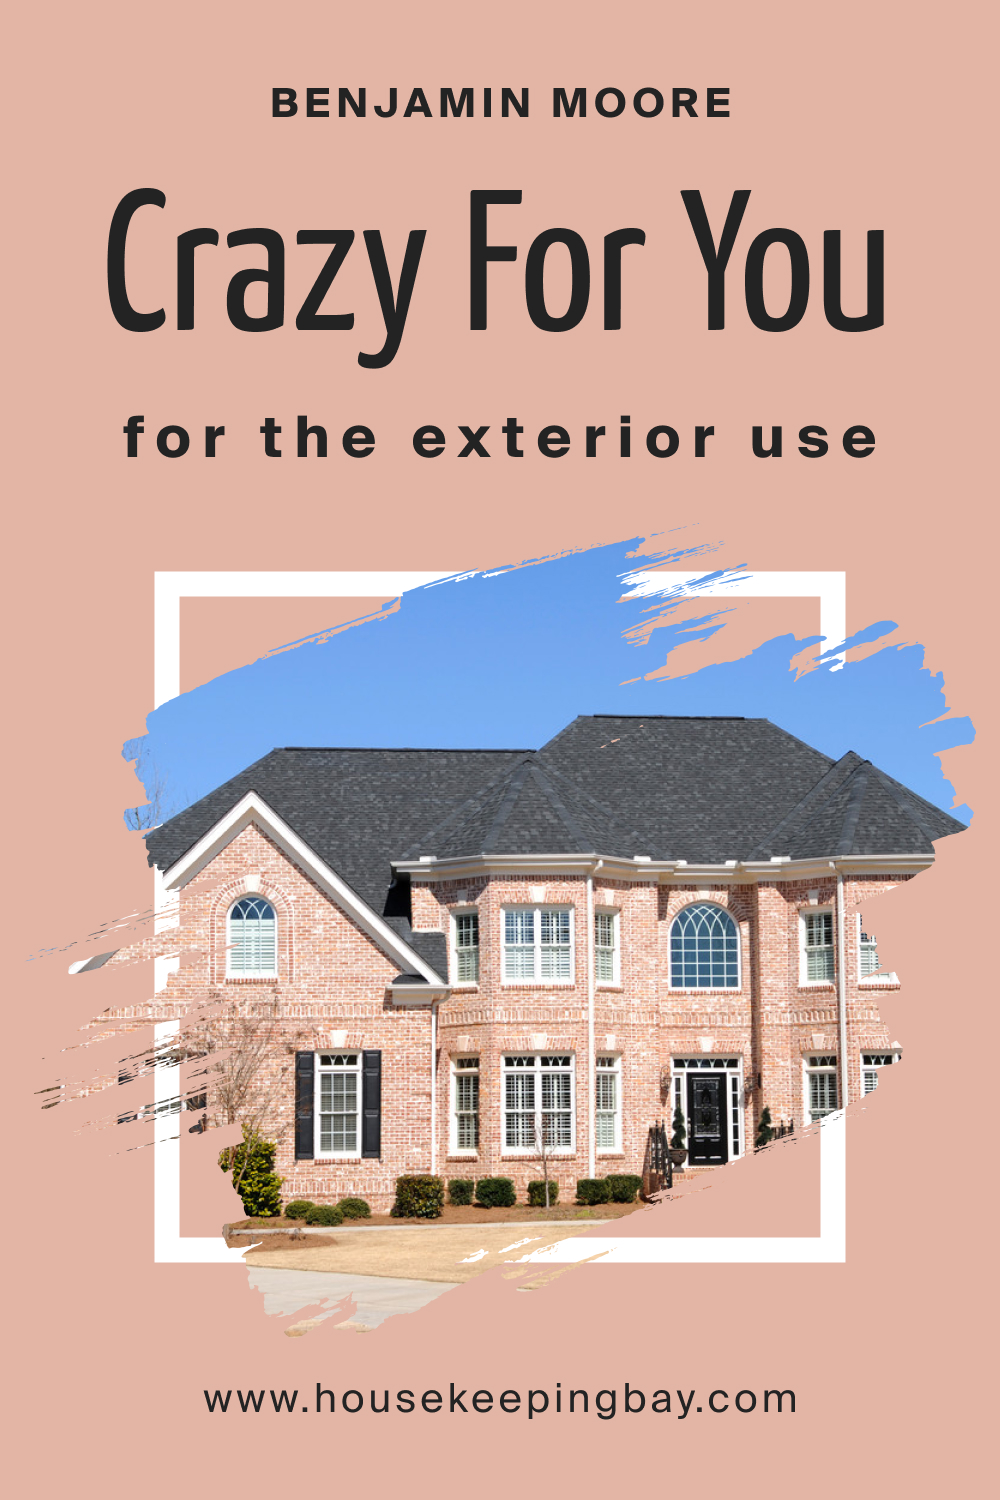 Benjamin Moore. BM Crazy For You 053 for the Exterior Use